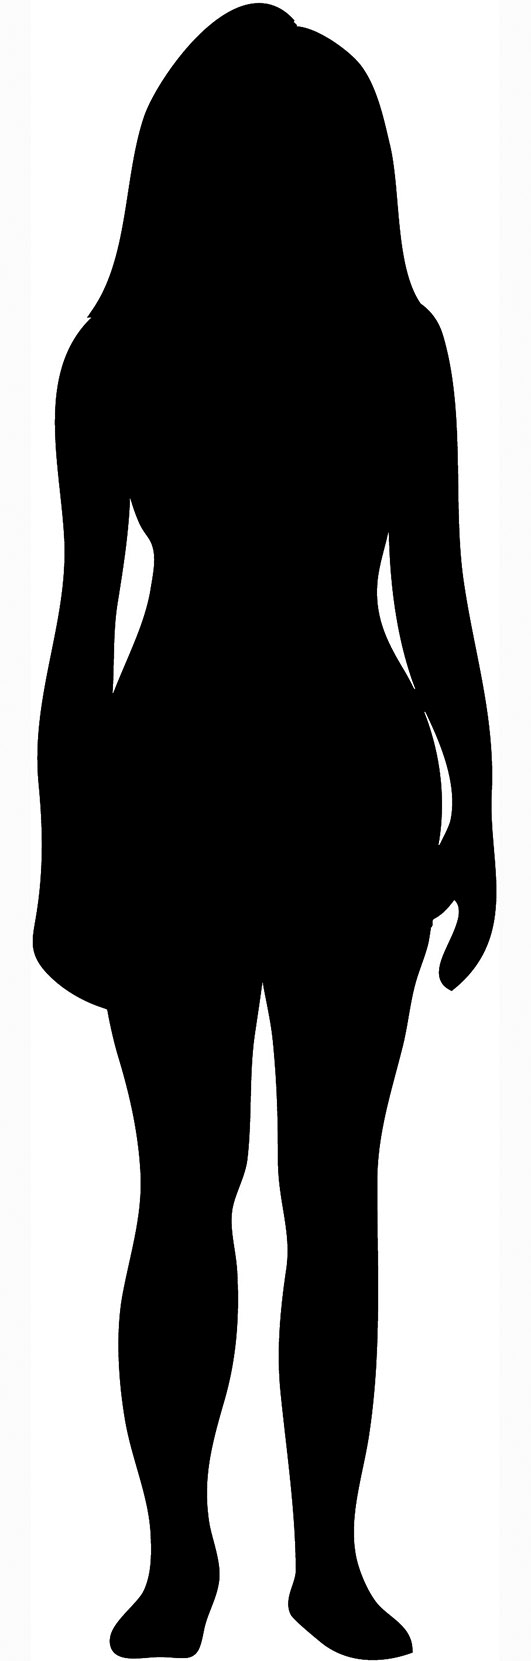 Silhouette of woman with long hair